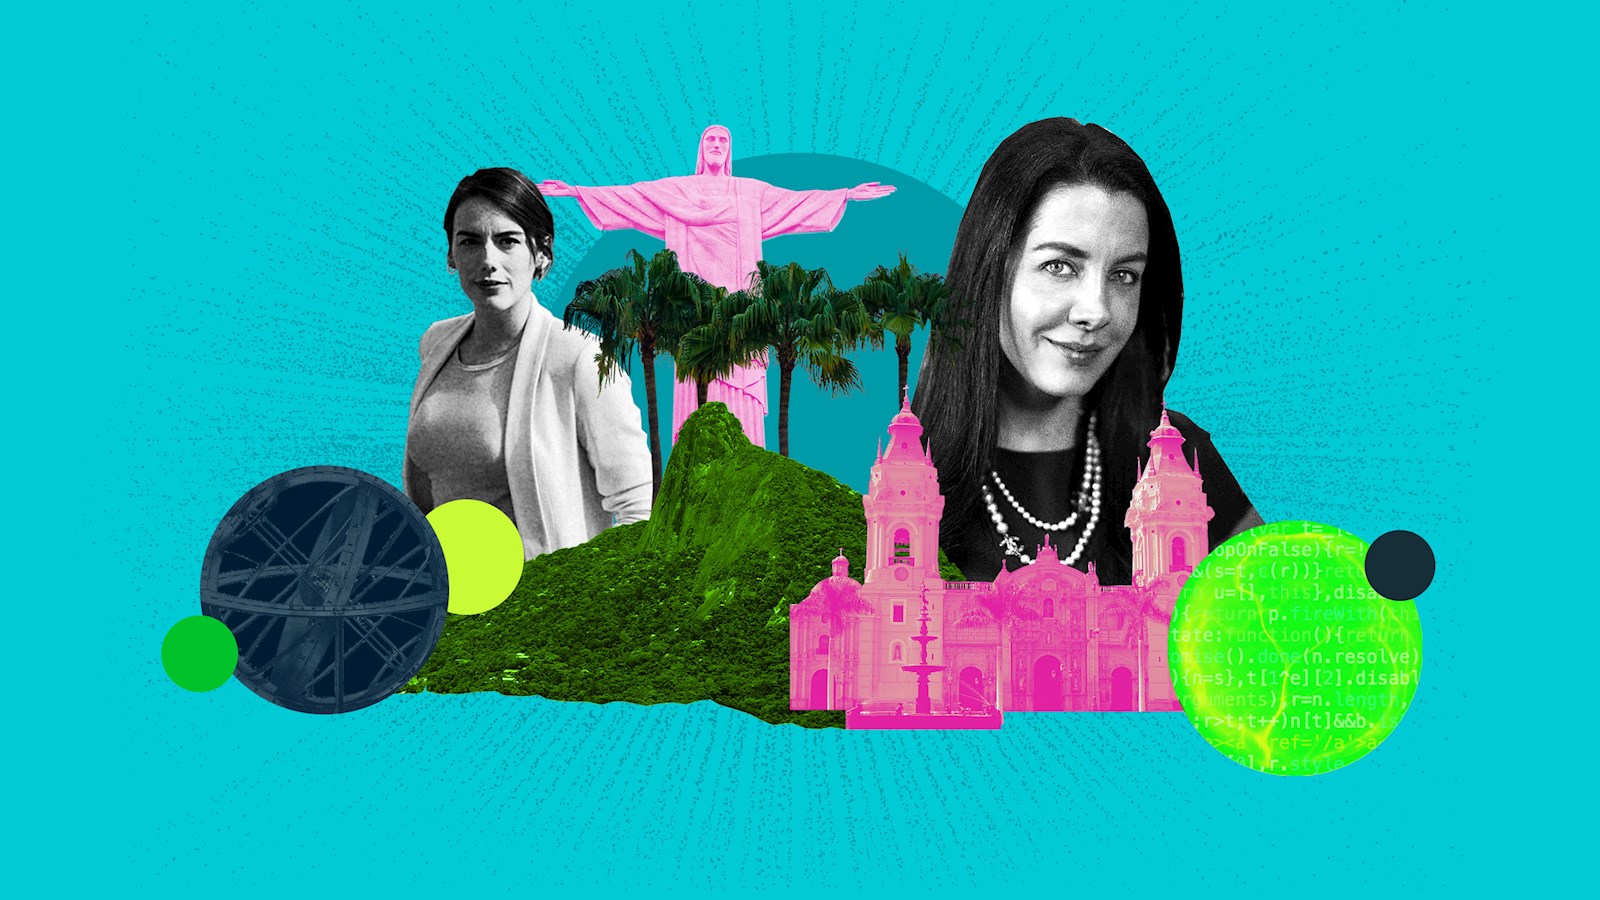 In conversation: Luciana Rodrigues and Cristina Risso